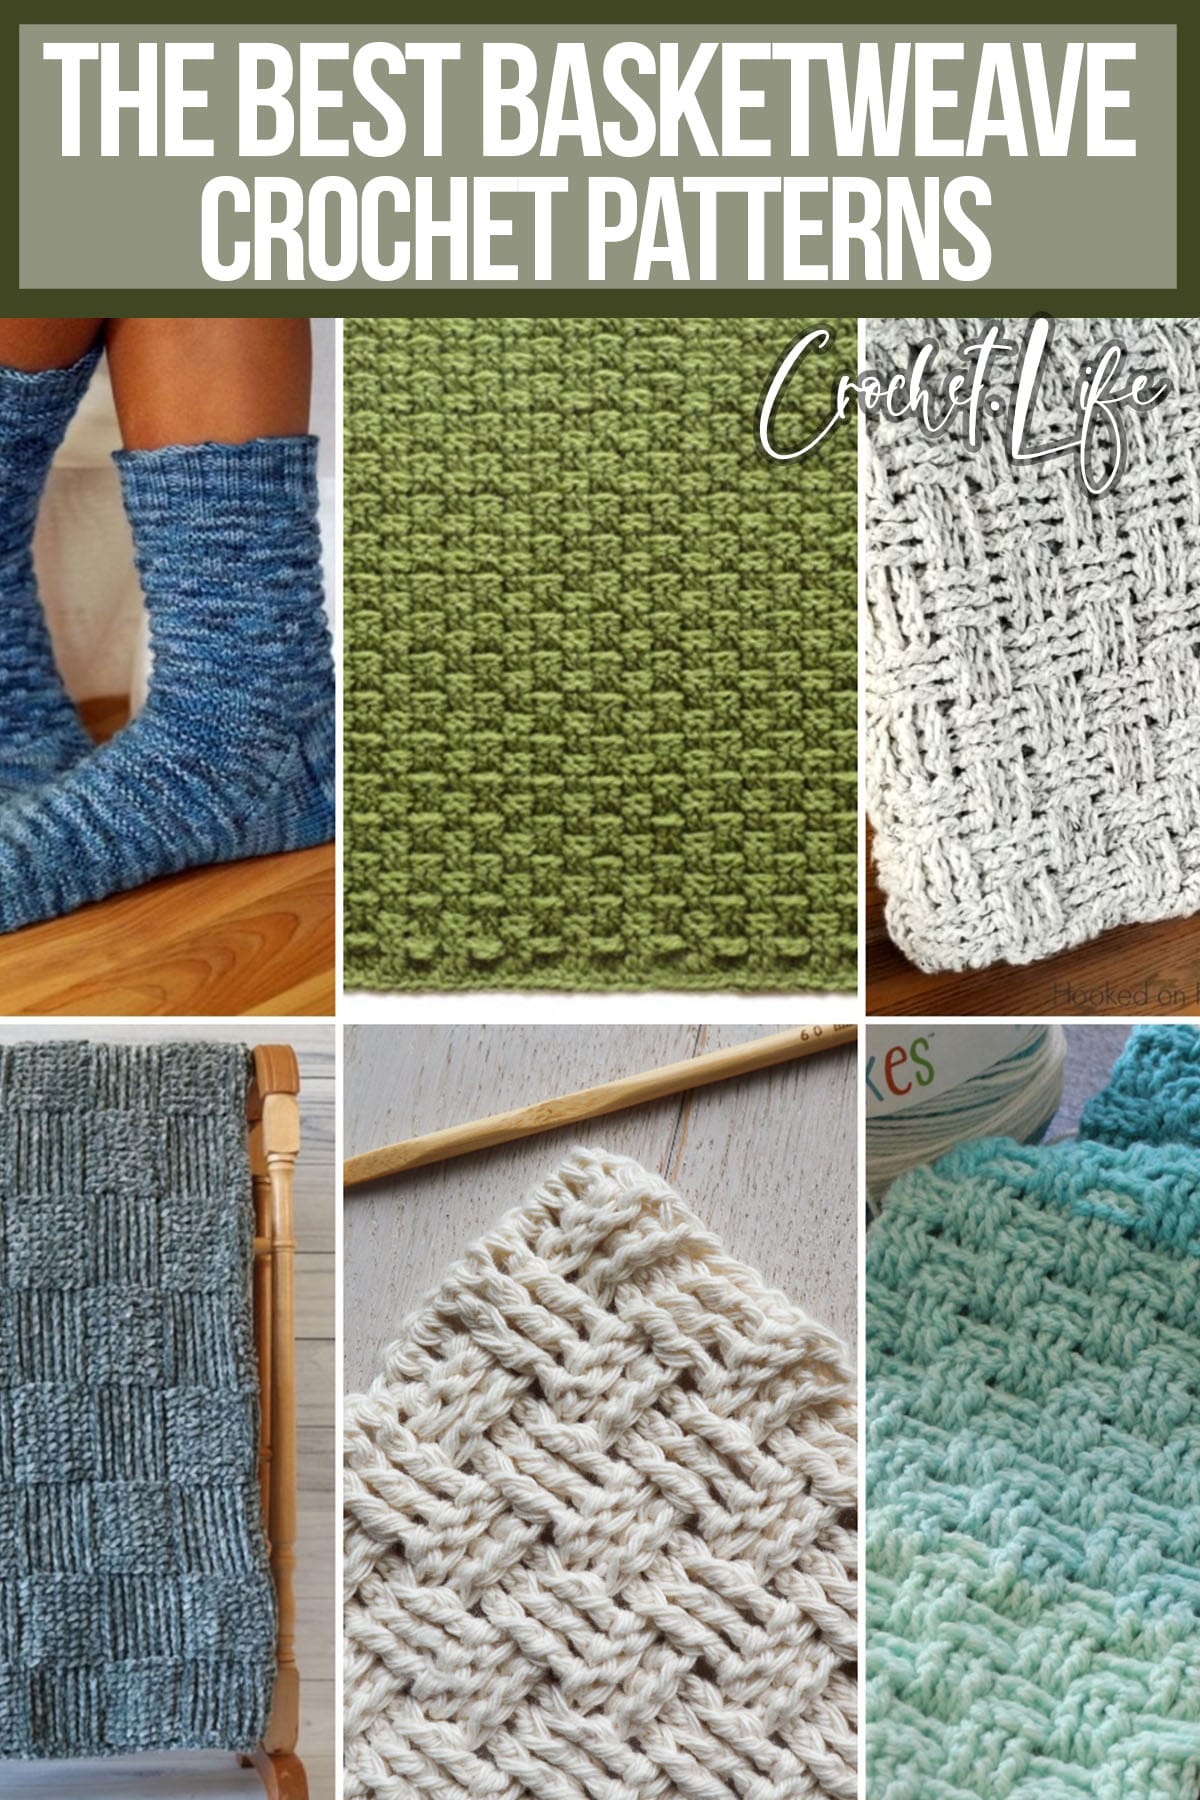 photo collage of crochet patterns with basketweave stitching with text which reads the best basketweave crochet patterns